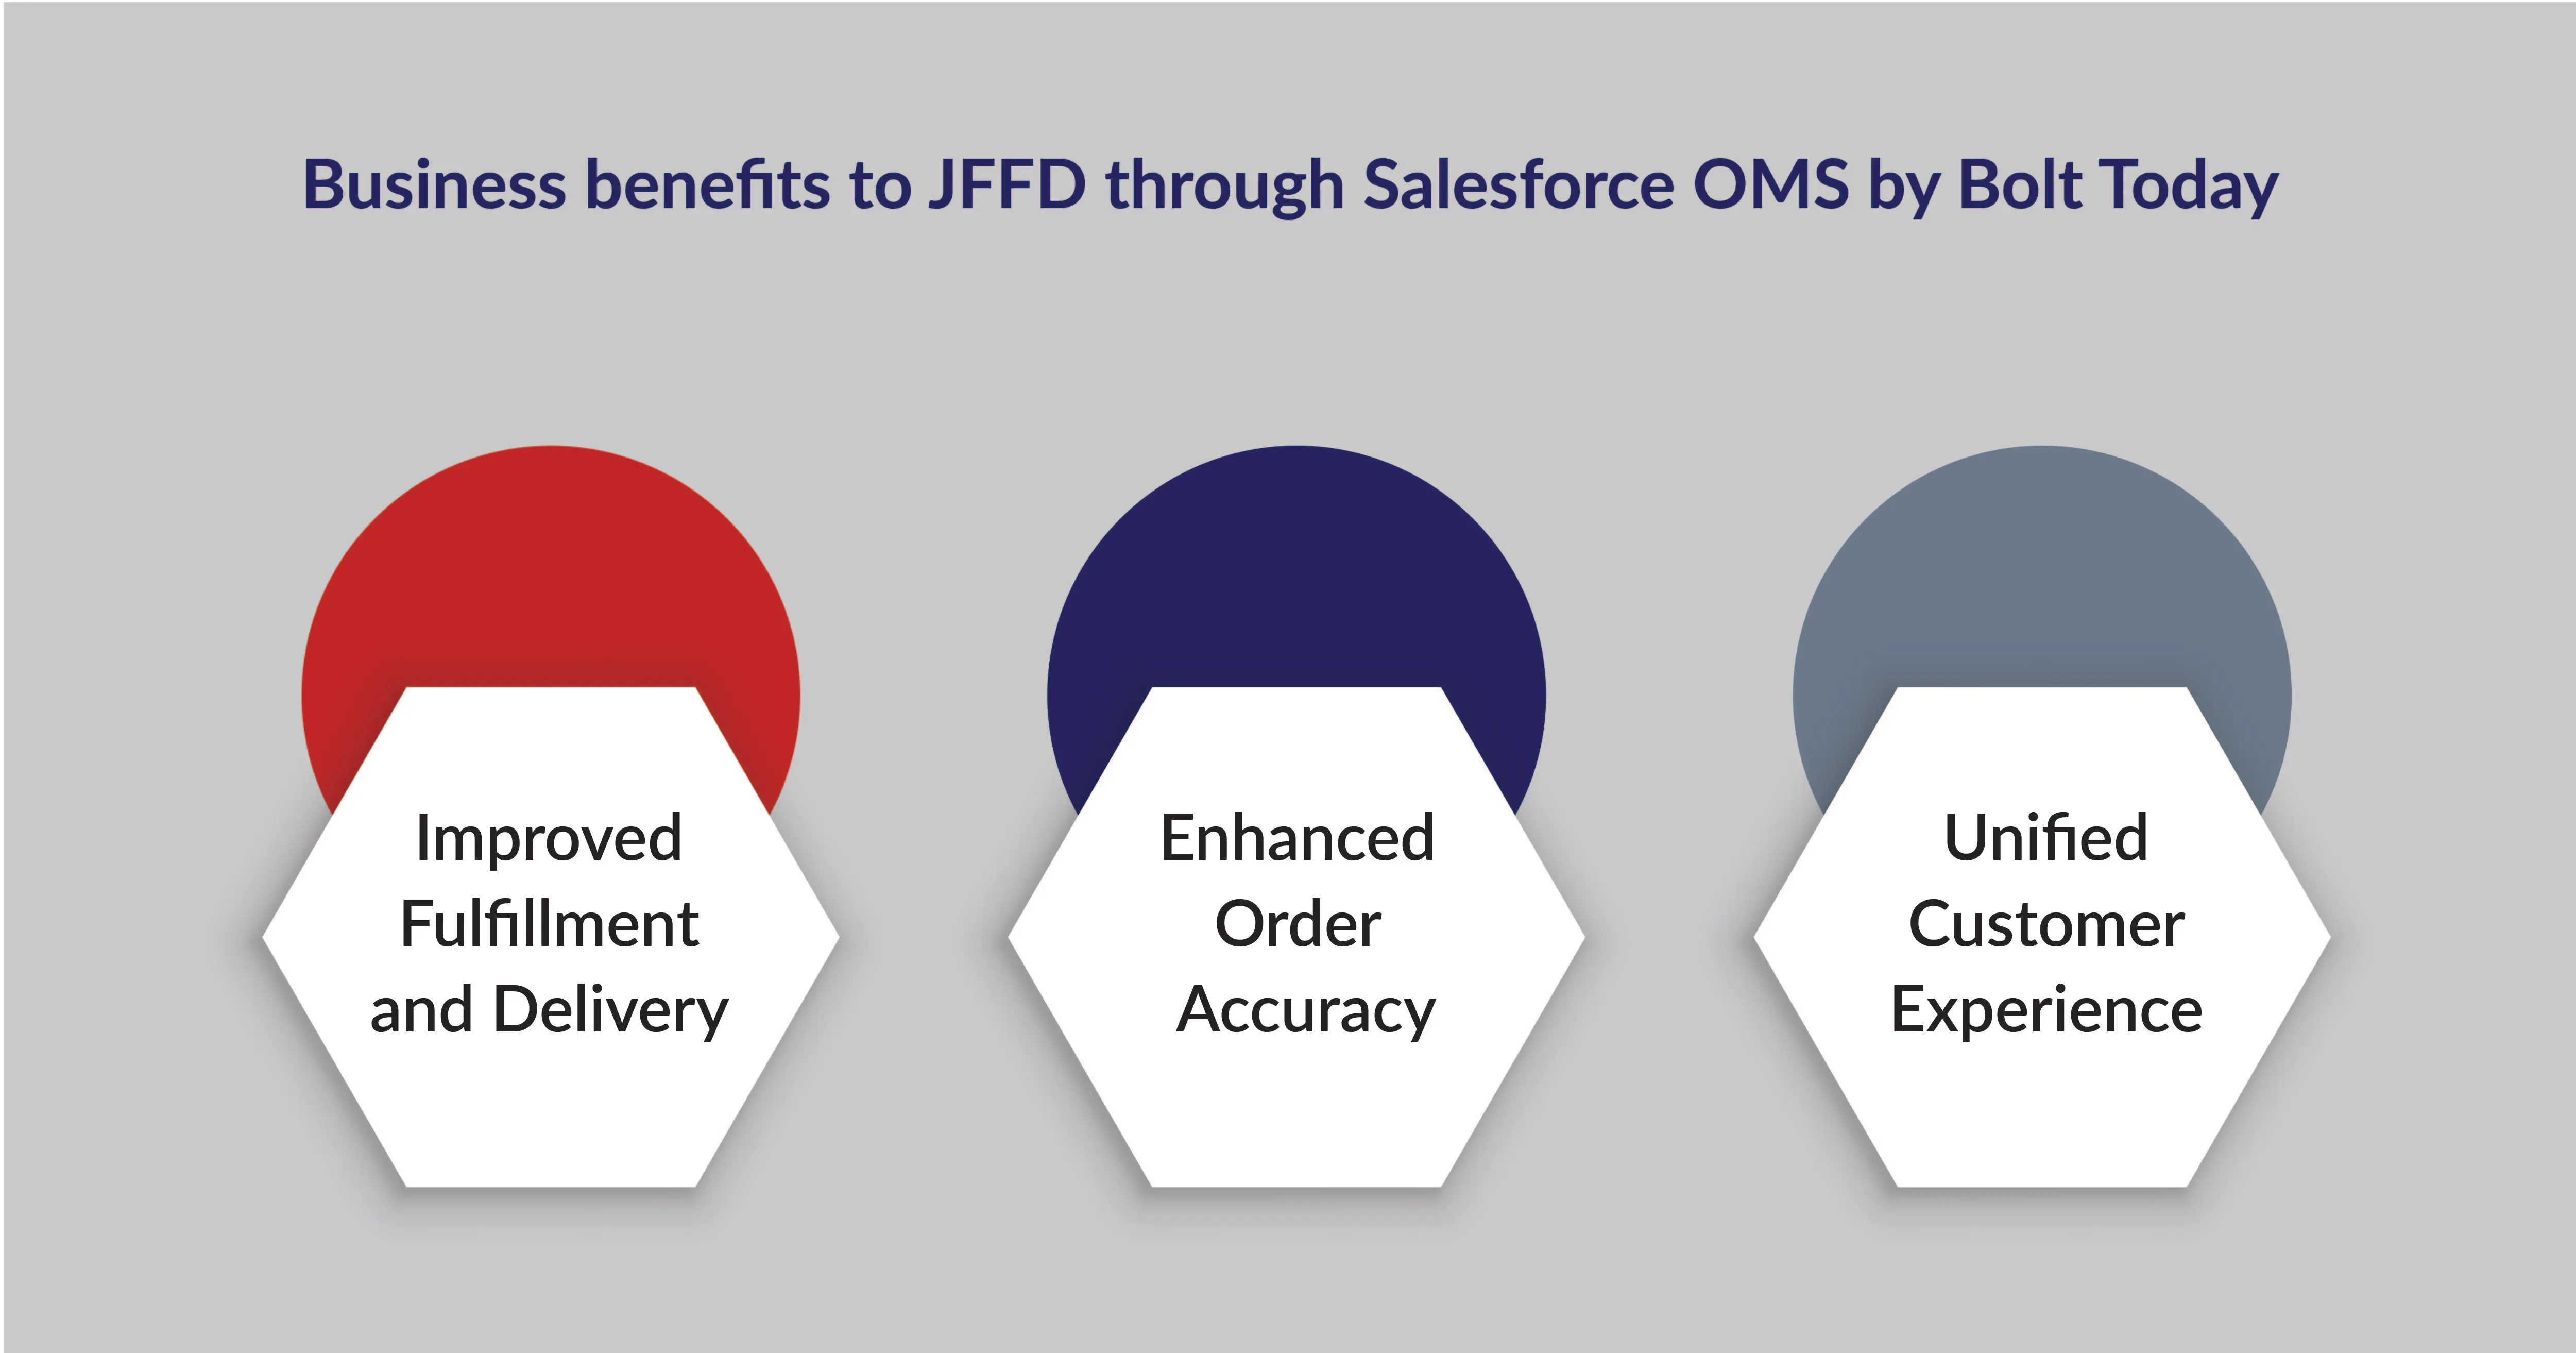 Business benefits to JFFD through Salesforce OMS by Bolt Today